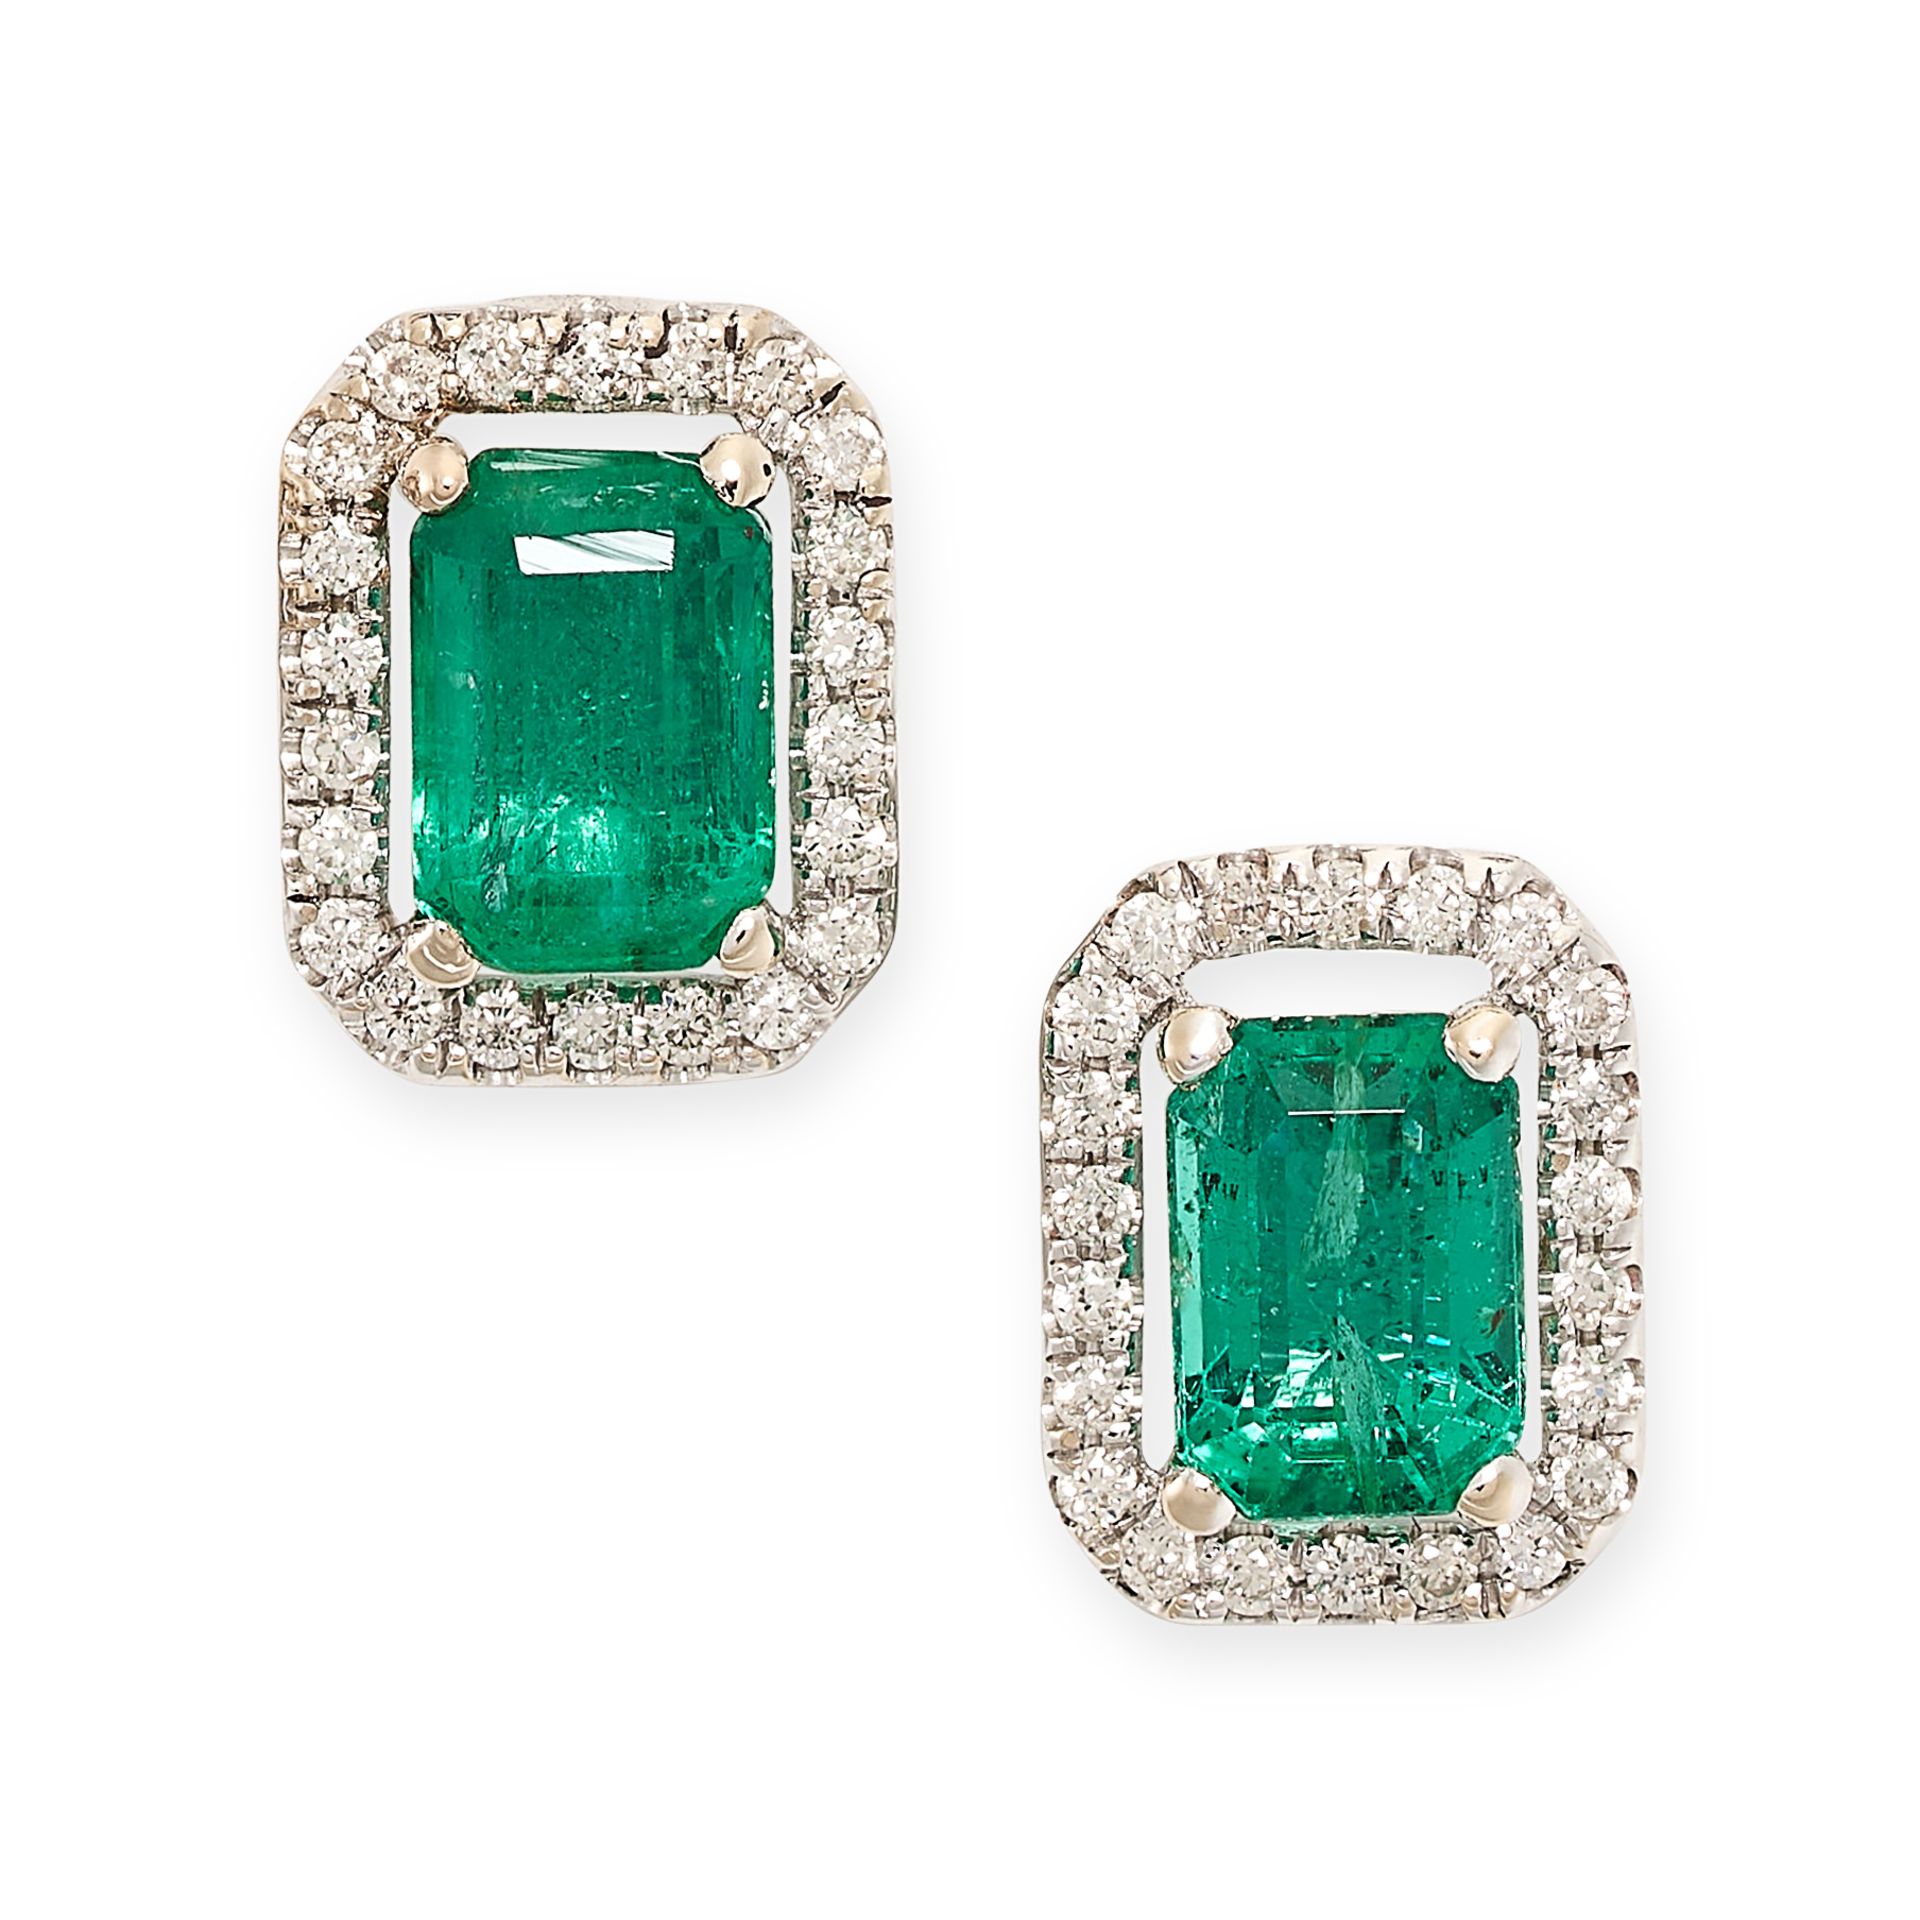 A PAIR OF EMERALD AND DIAMOND STUD EARRINGS in 18ct white gold, each set with an emerald cut emerald